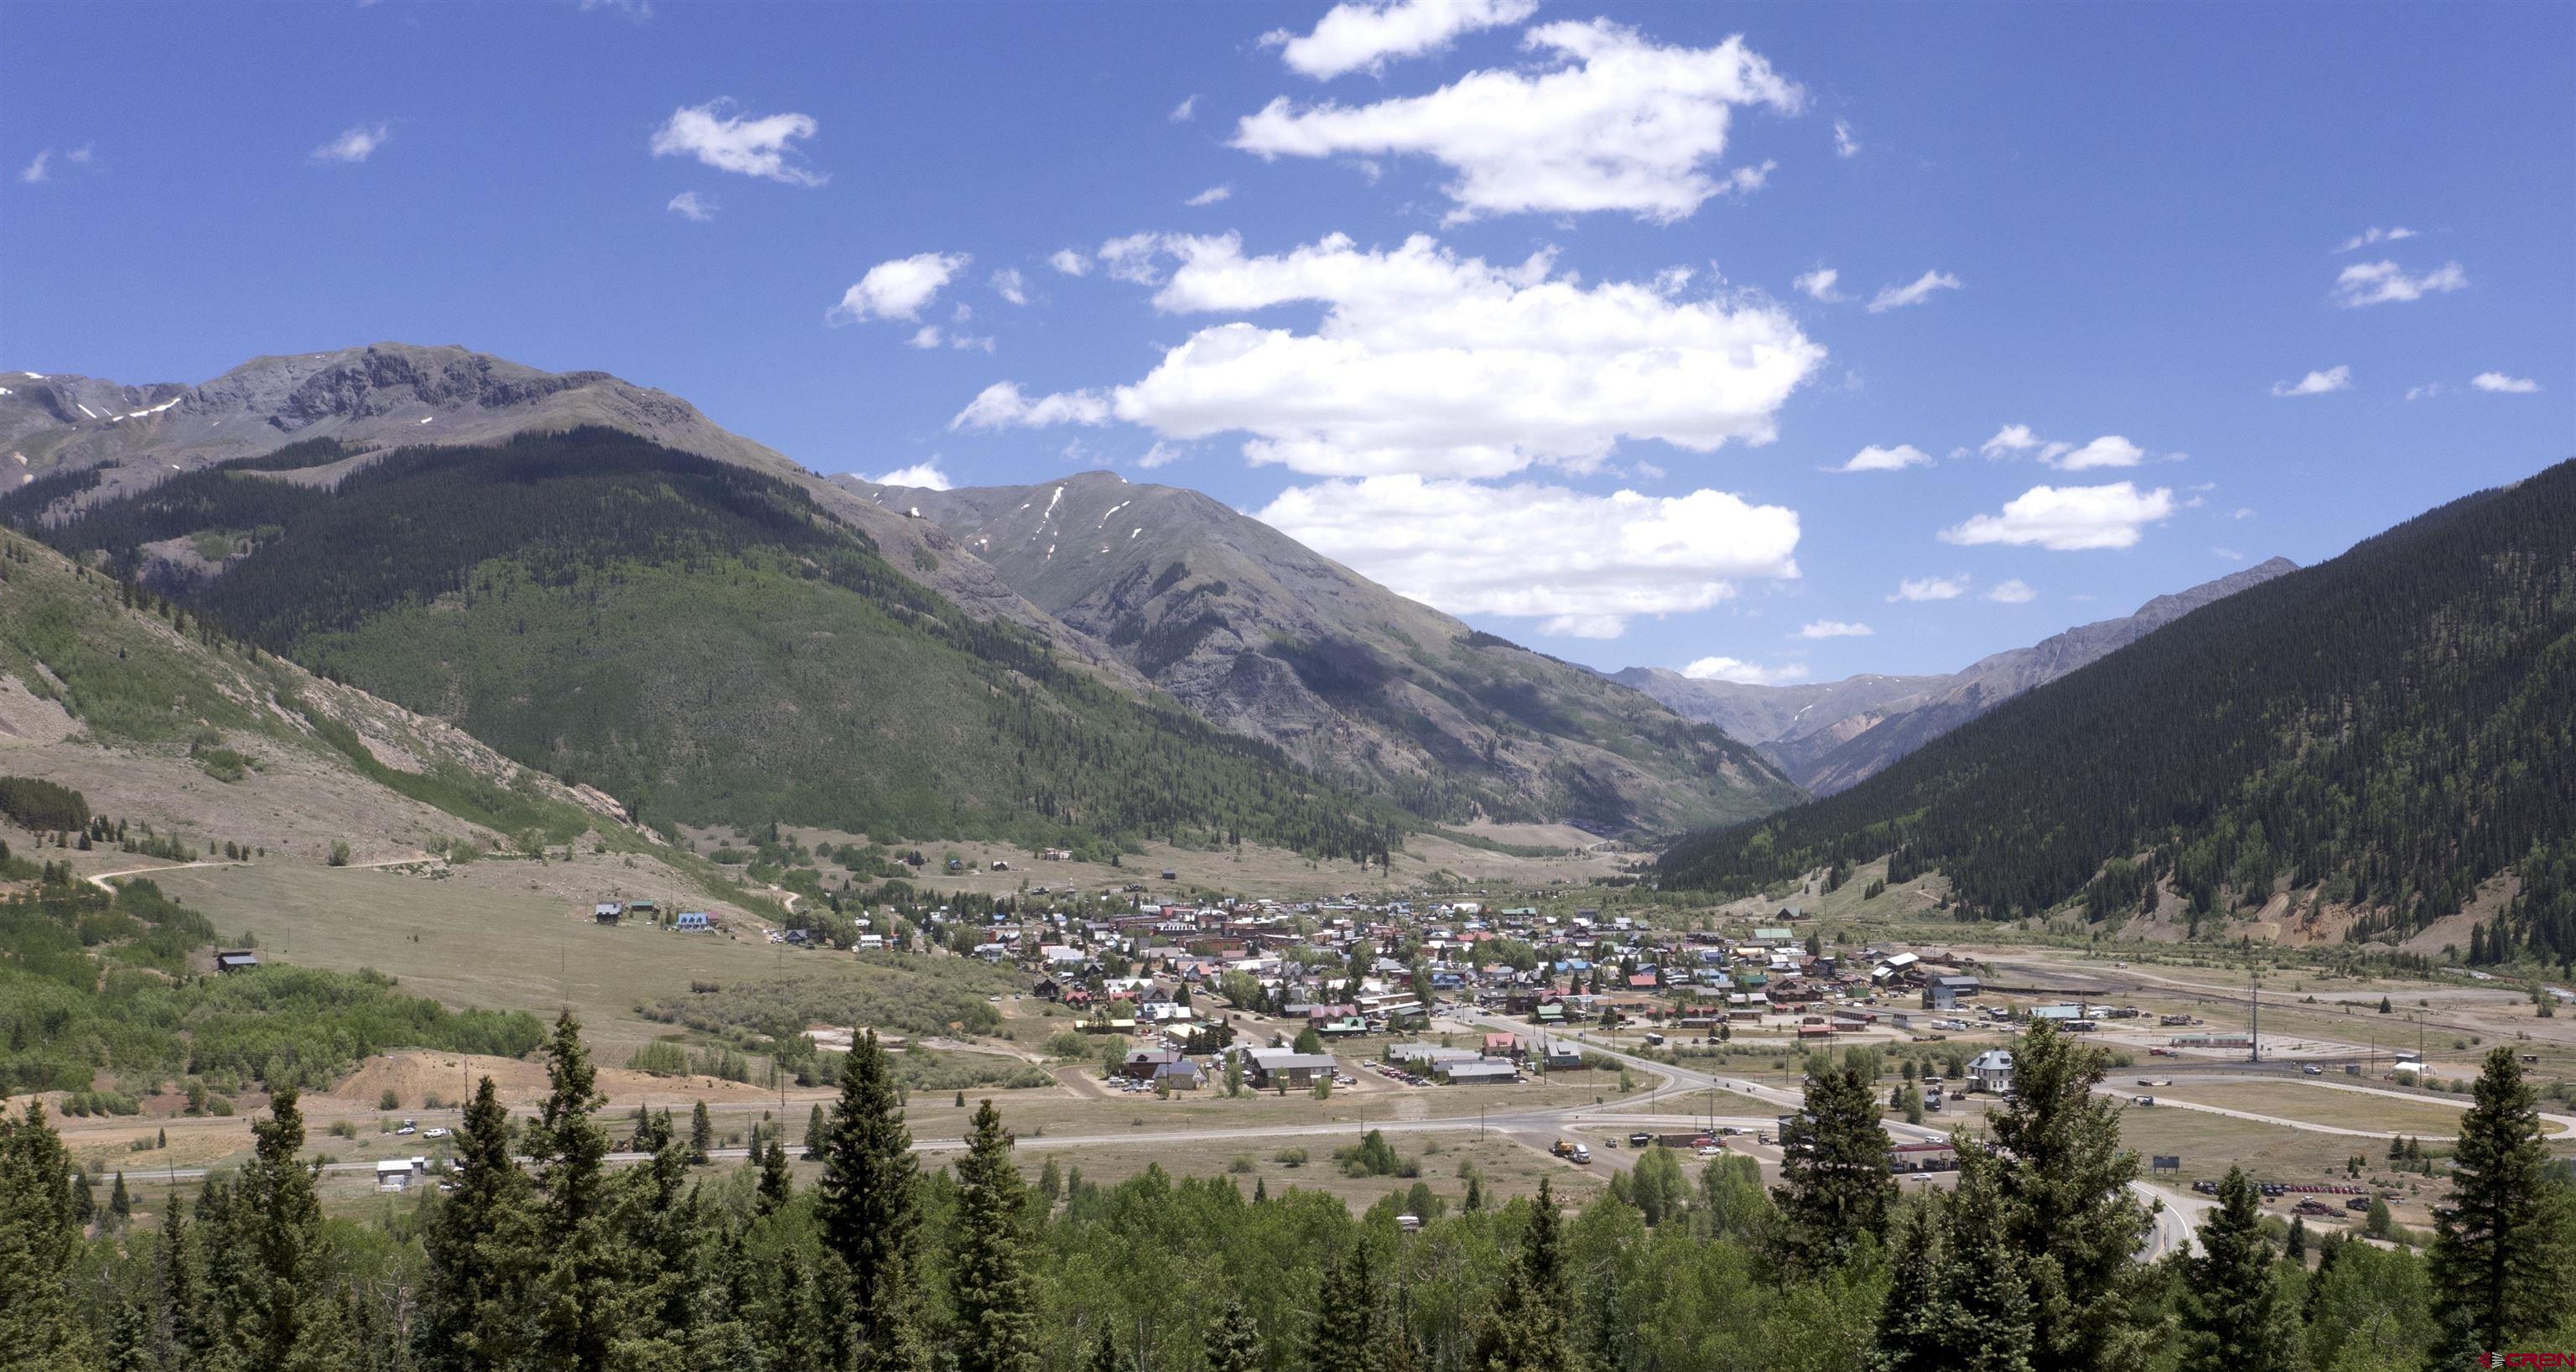 Photo of Tbd 5th & Reese St in Silverton, CO